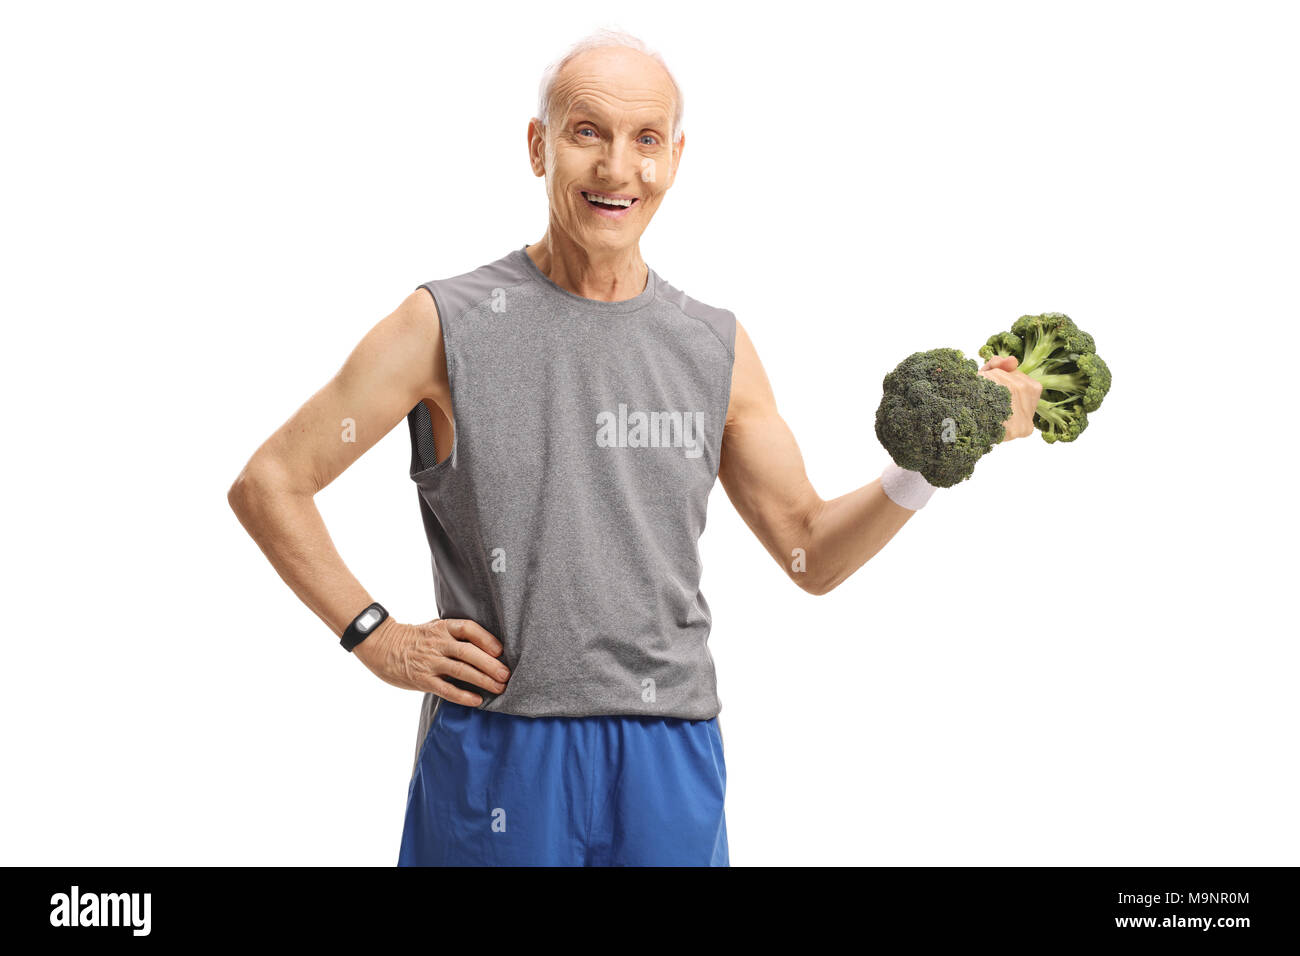 Elderly man holding a broccoli dumbbell and smiling isolated on white background Stock Photo